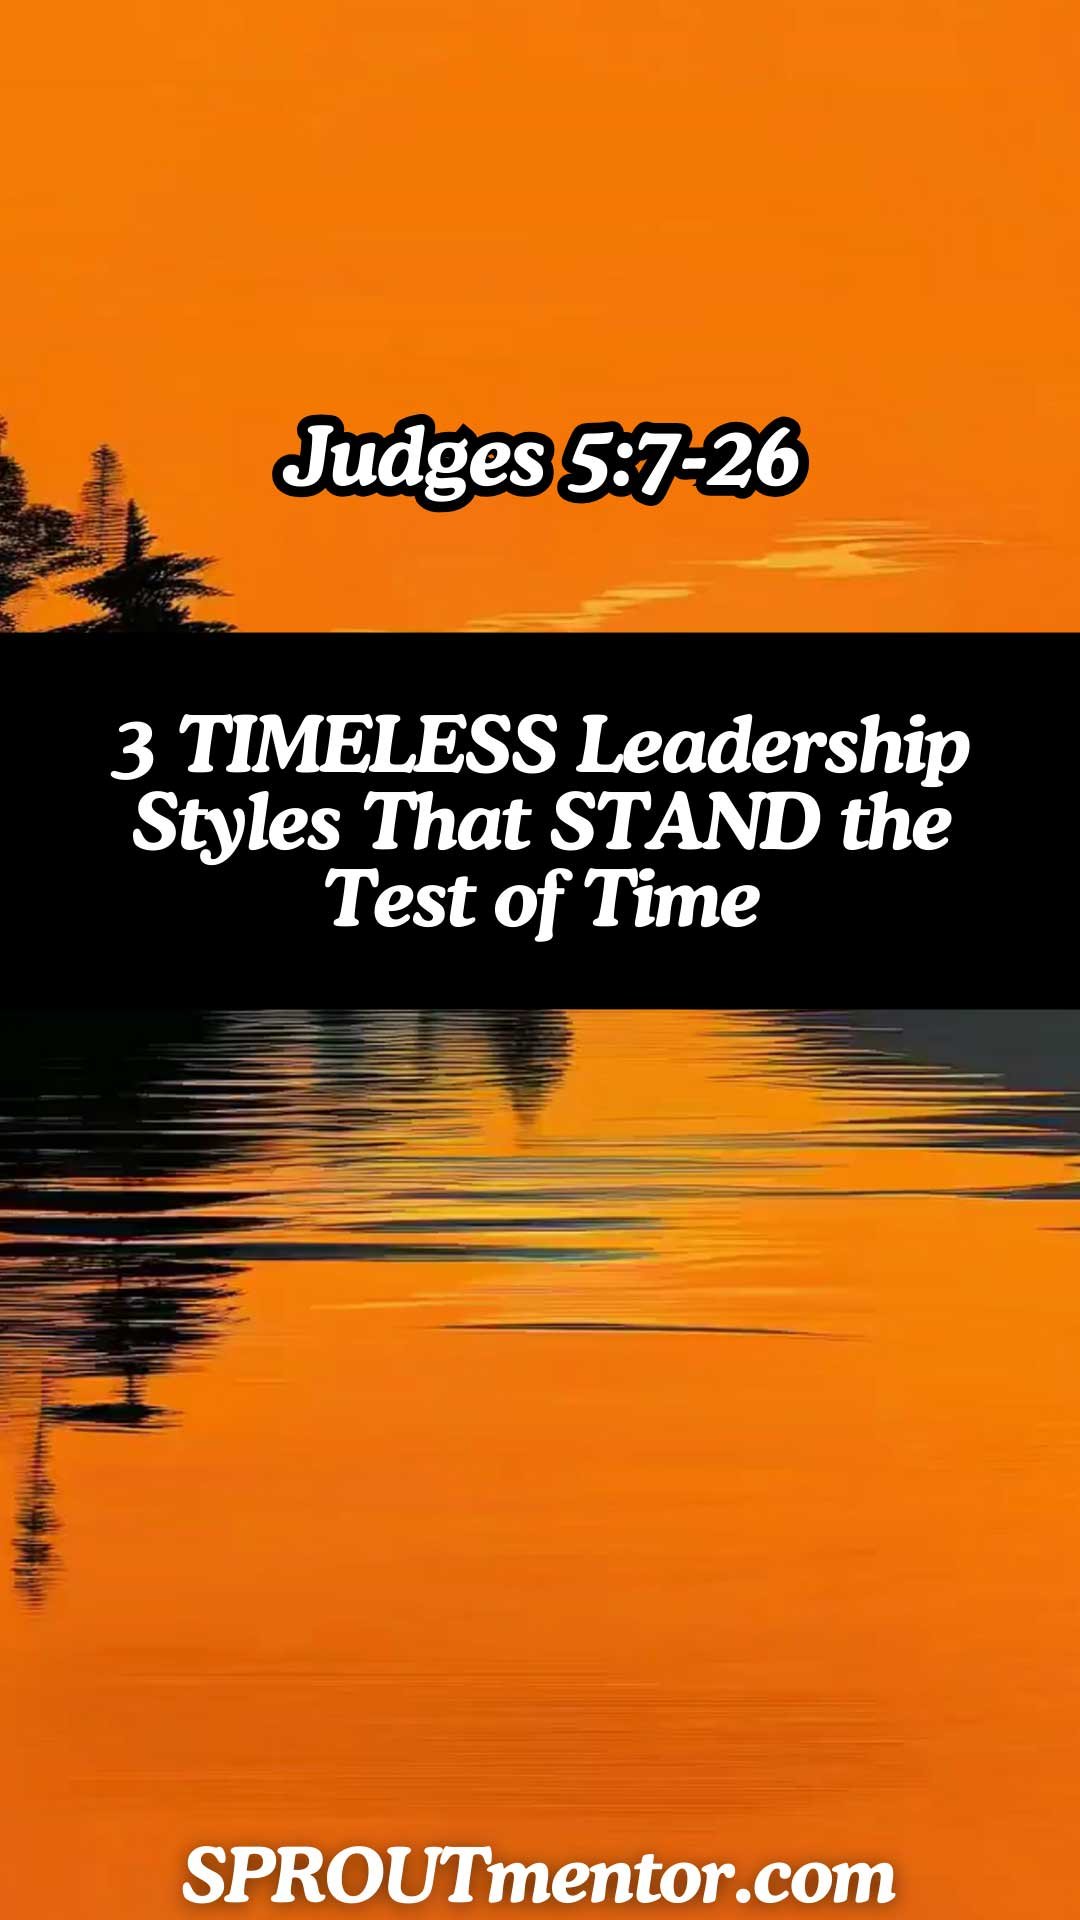 3 TIMELESS Leadership Styles That STAND the Test of Time [Judges 5:7-26]